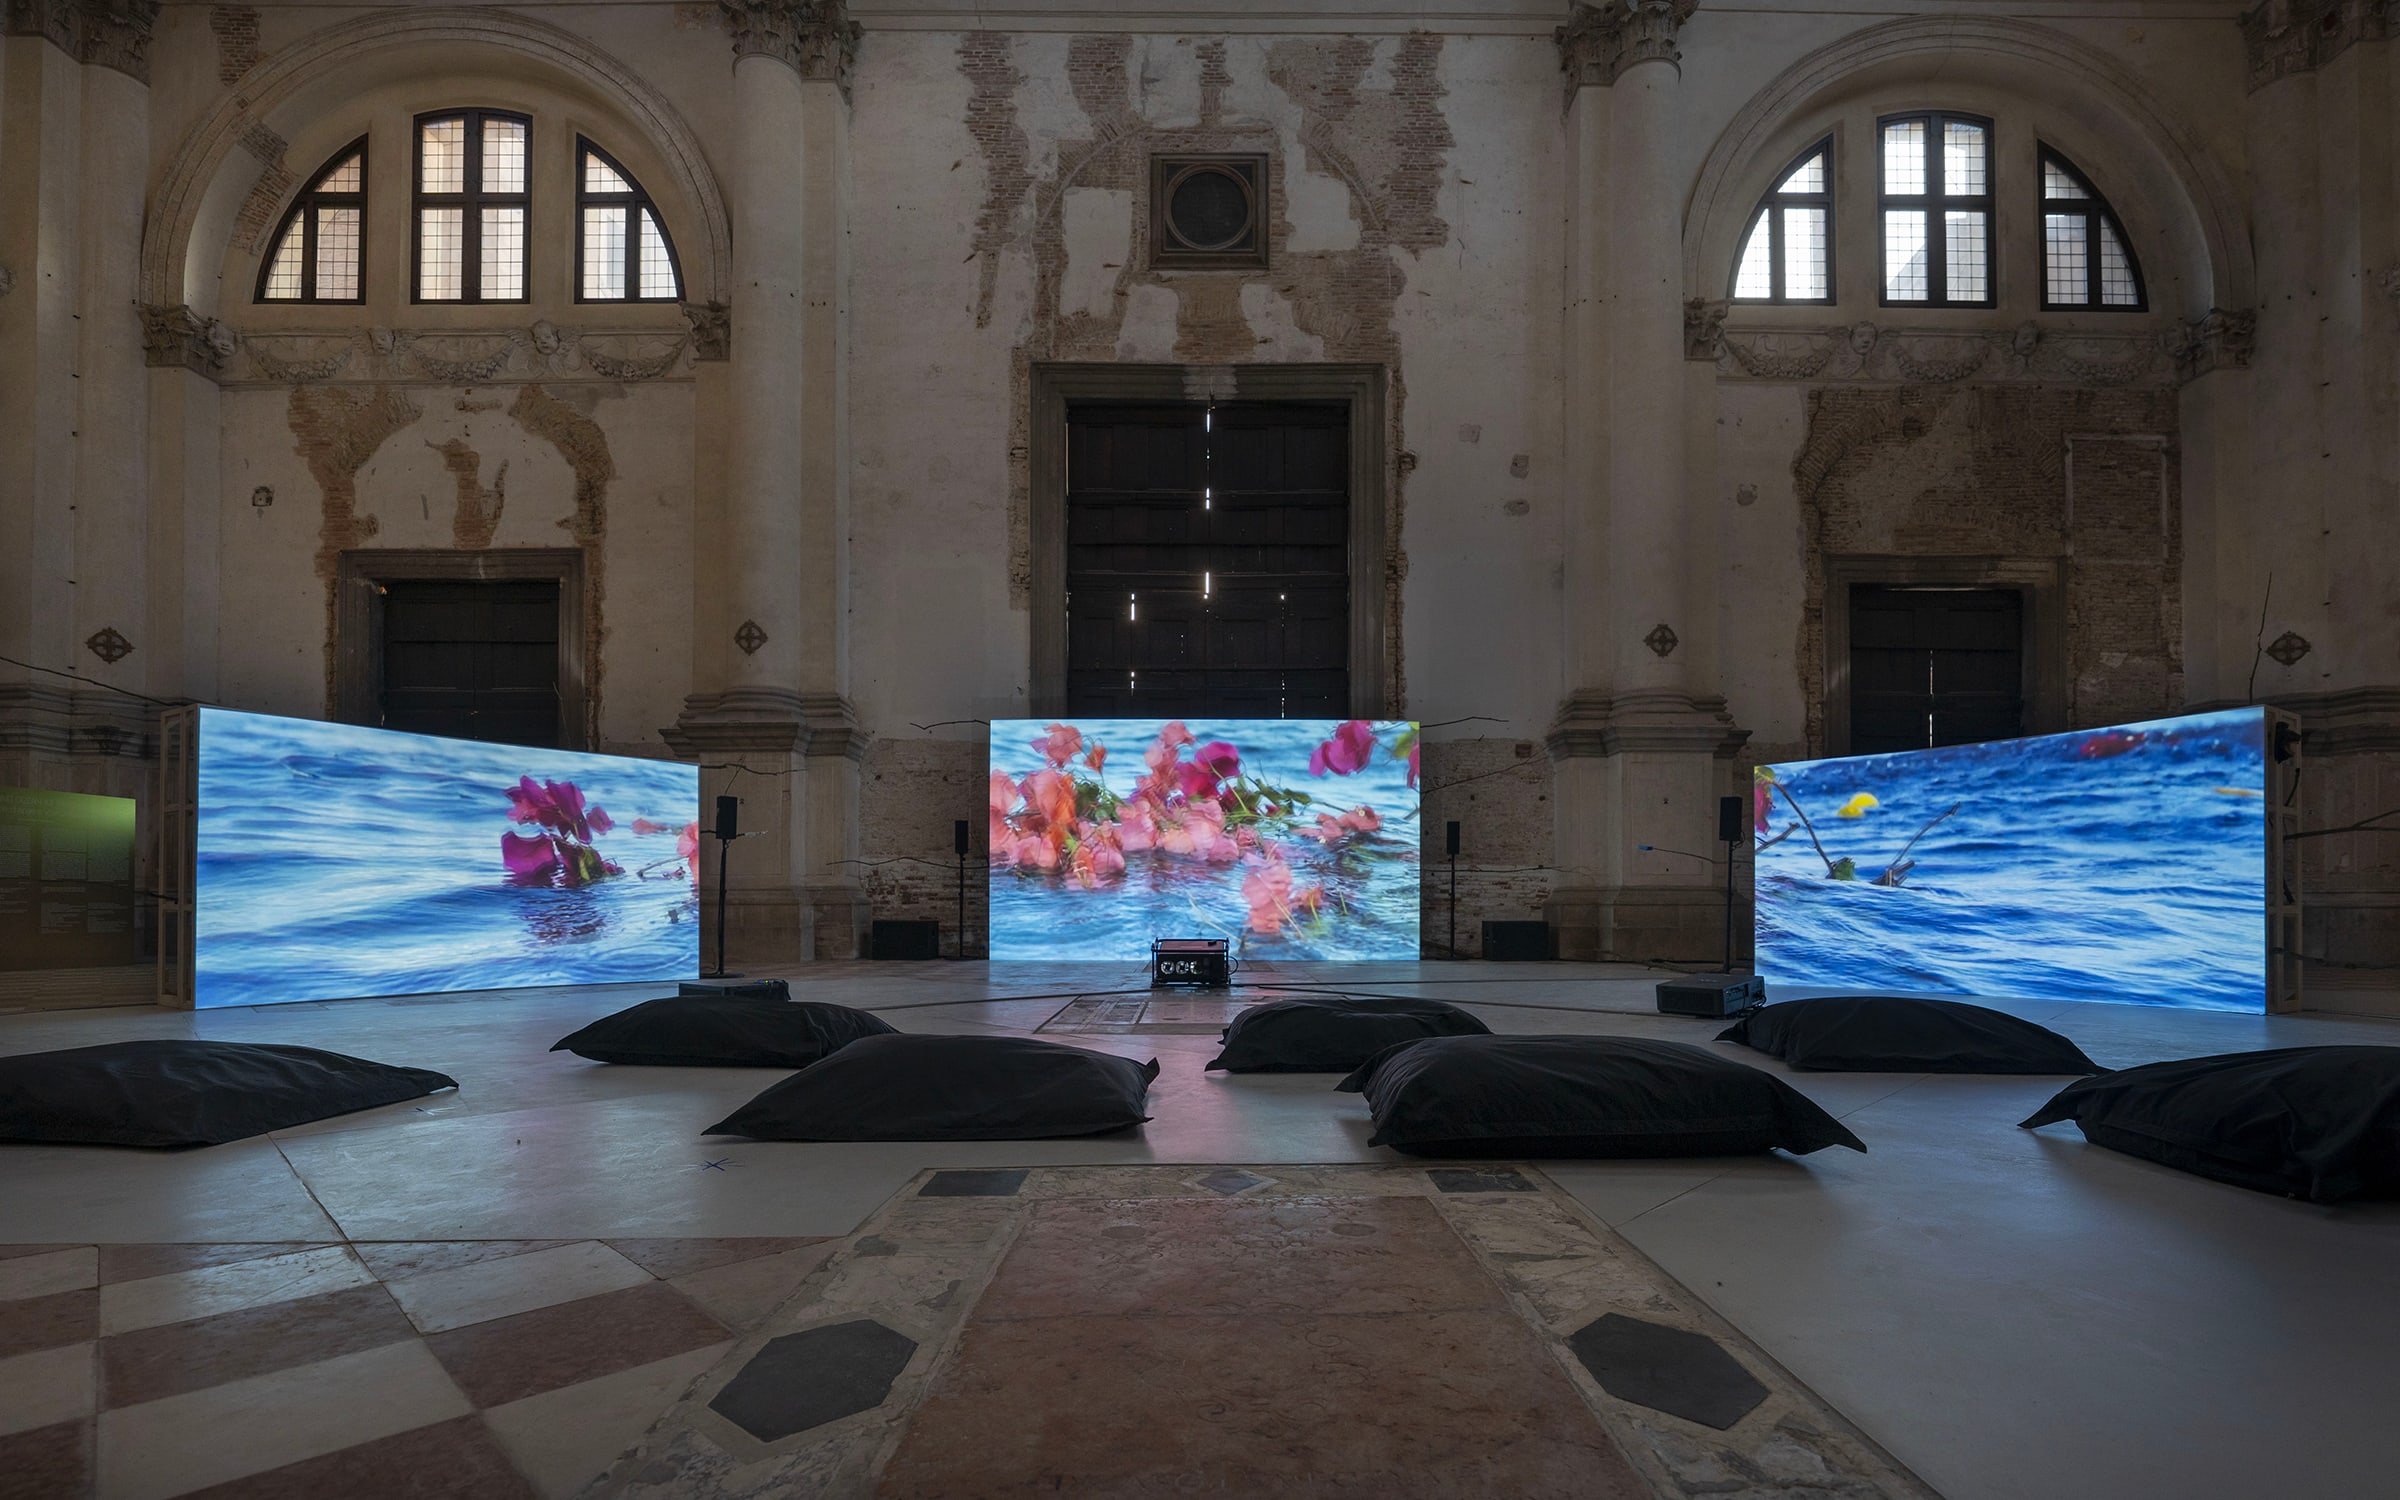 Exhibition view of ‘The Soul Expanding Ocean #3’ by Dineo Seshee Bopape. Ocean Space, Venice, 2022. Commissioned and produced by TBA21–Academy. TBA21 Thyssen-Bornemisza Art Contemporary Collection. Photograph by Matteo De Fina.